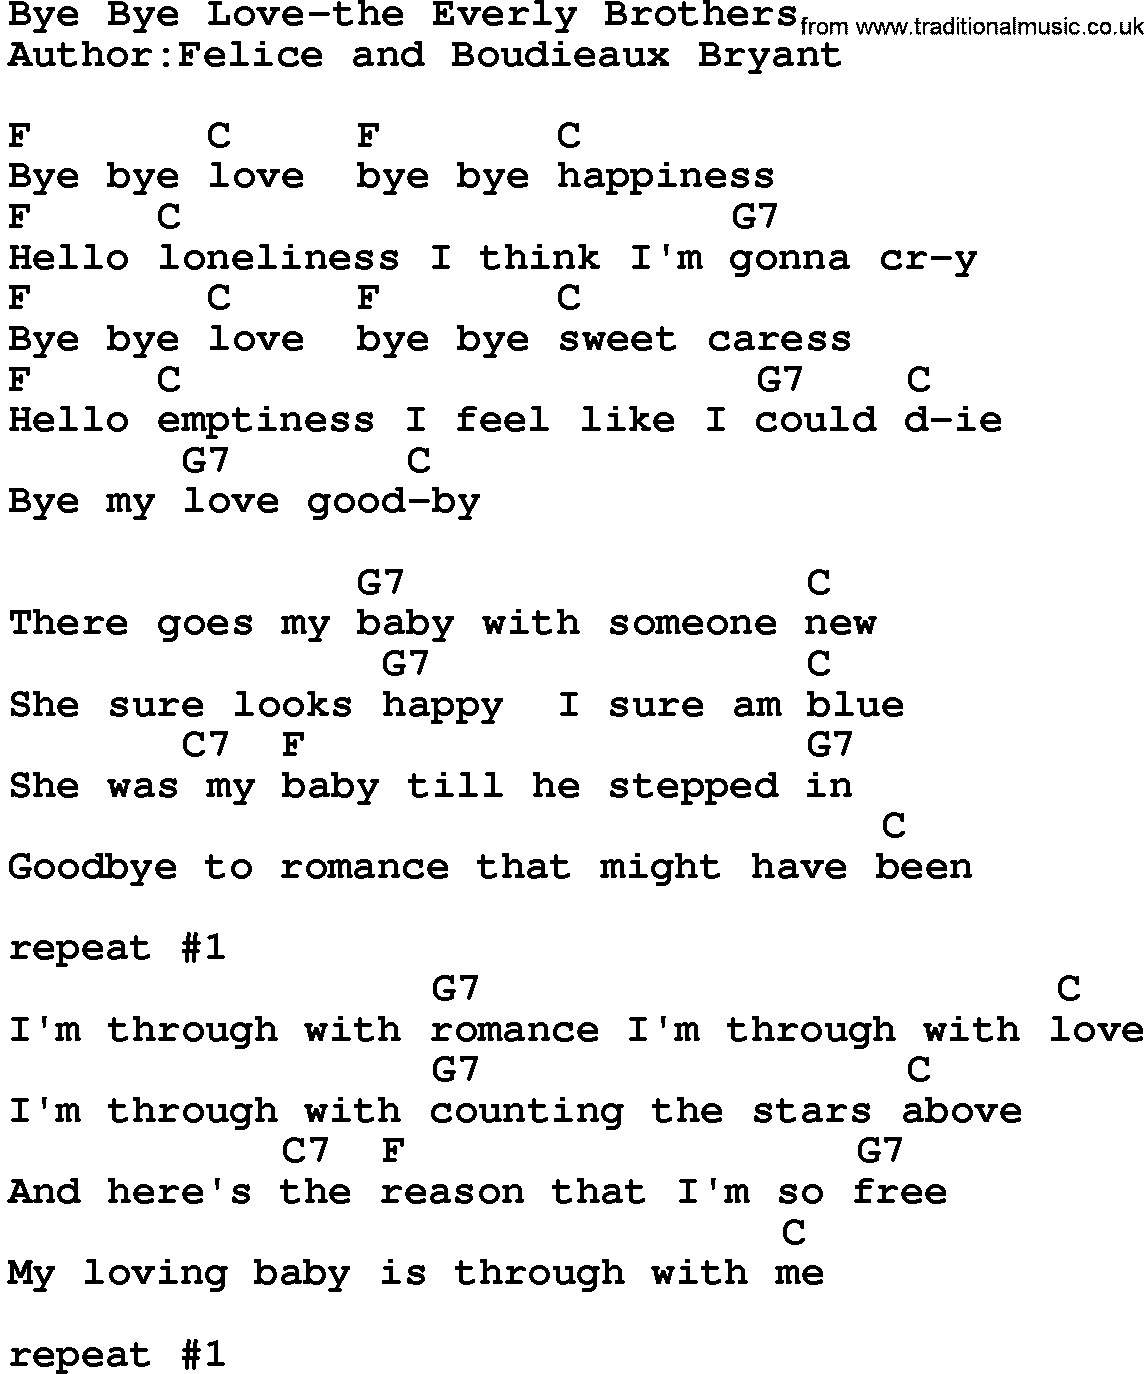 Country music song: Bye Bye Love-The Everly Brothers lyrics and chords